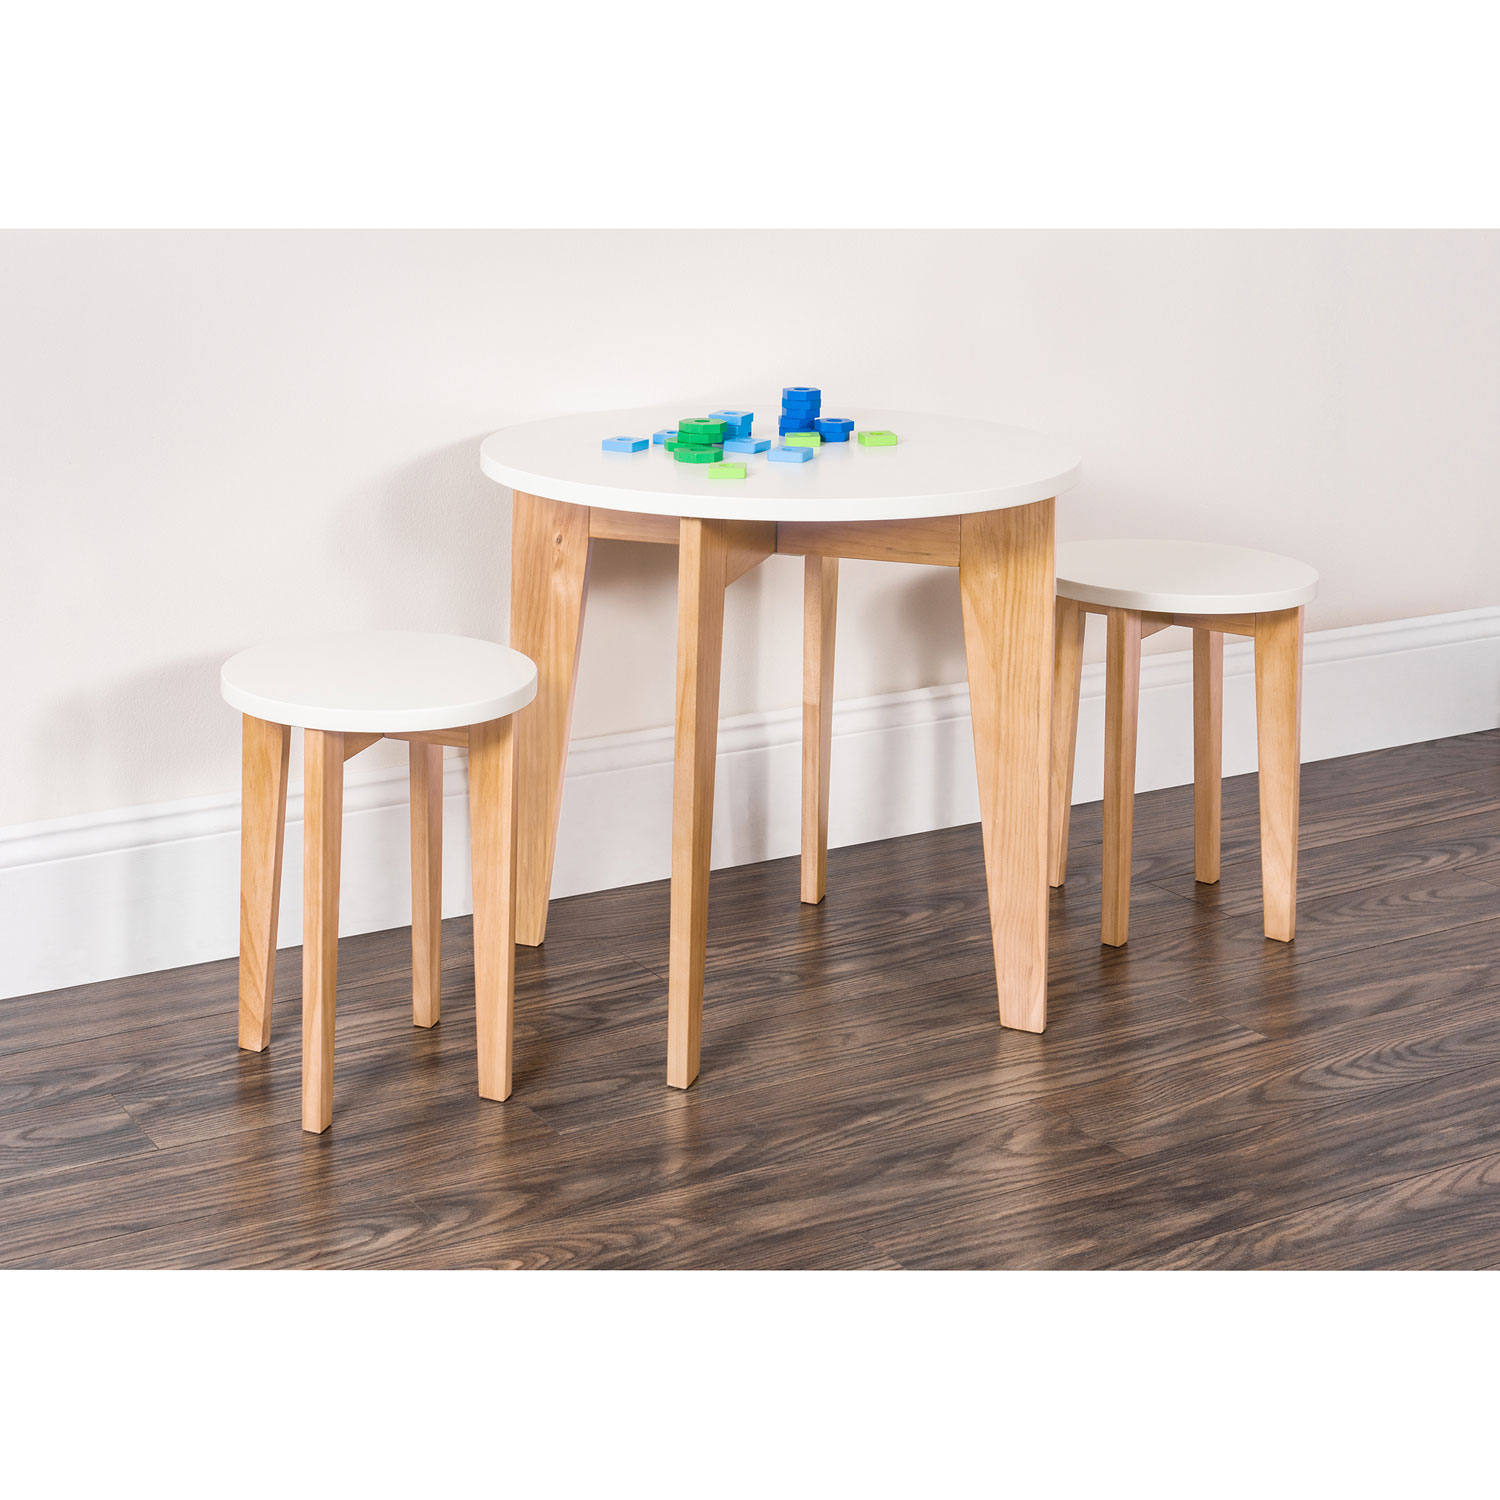 Forever Eclectic Geo 3-Piece Kids Table & Stool Set - White/Natural